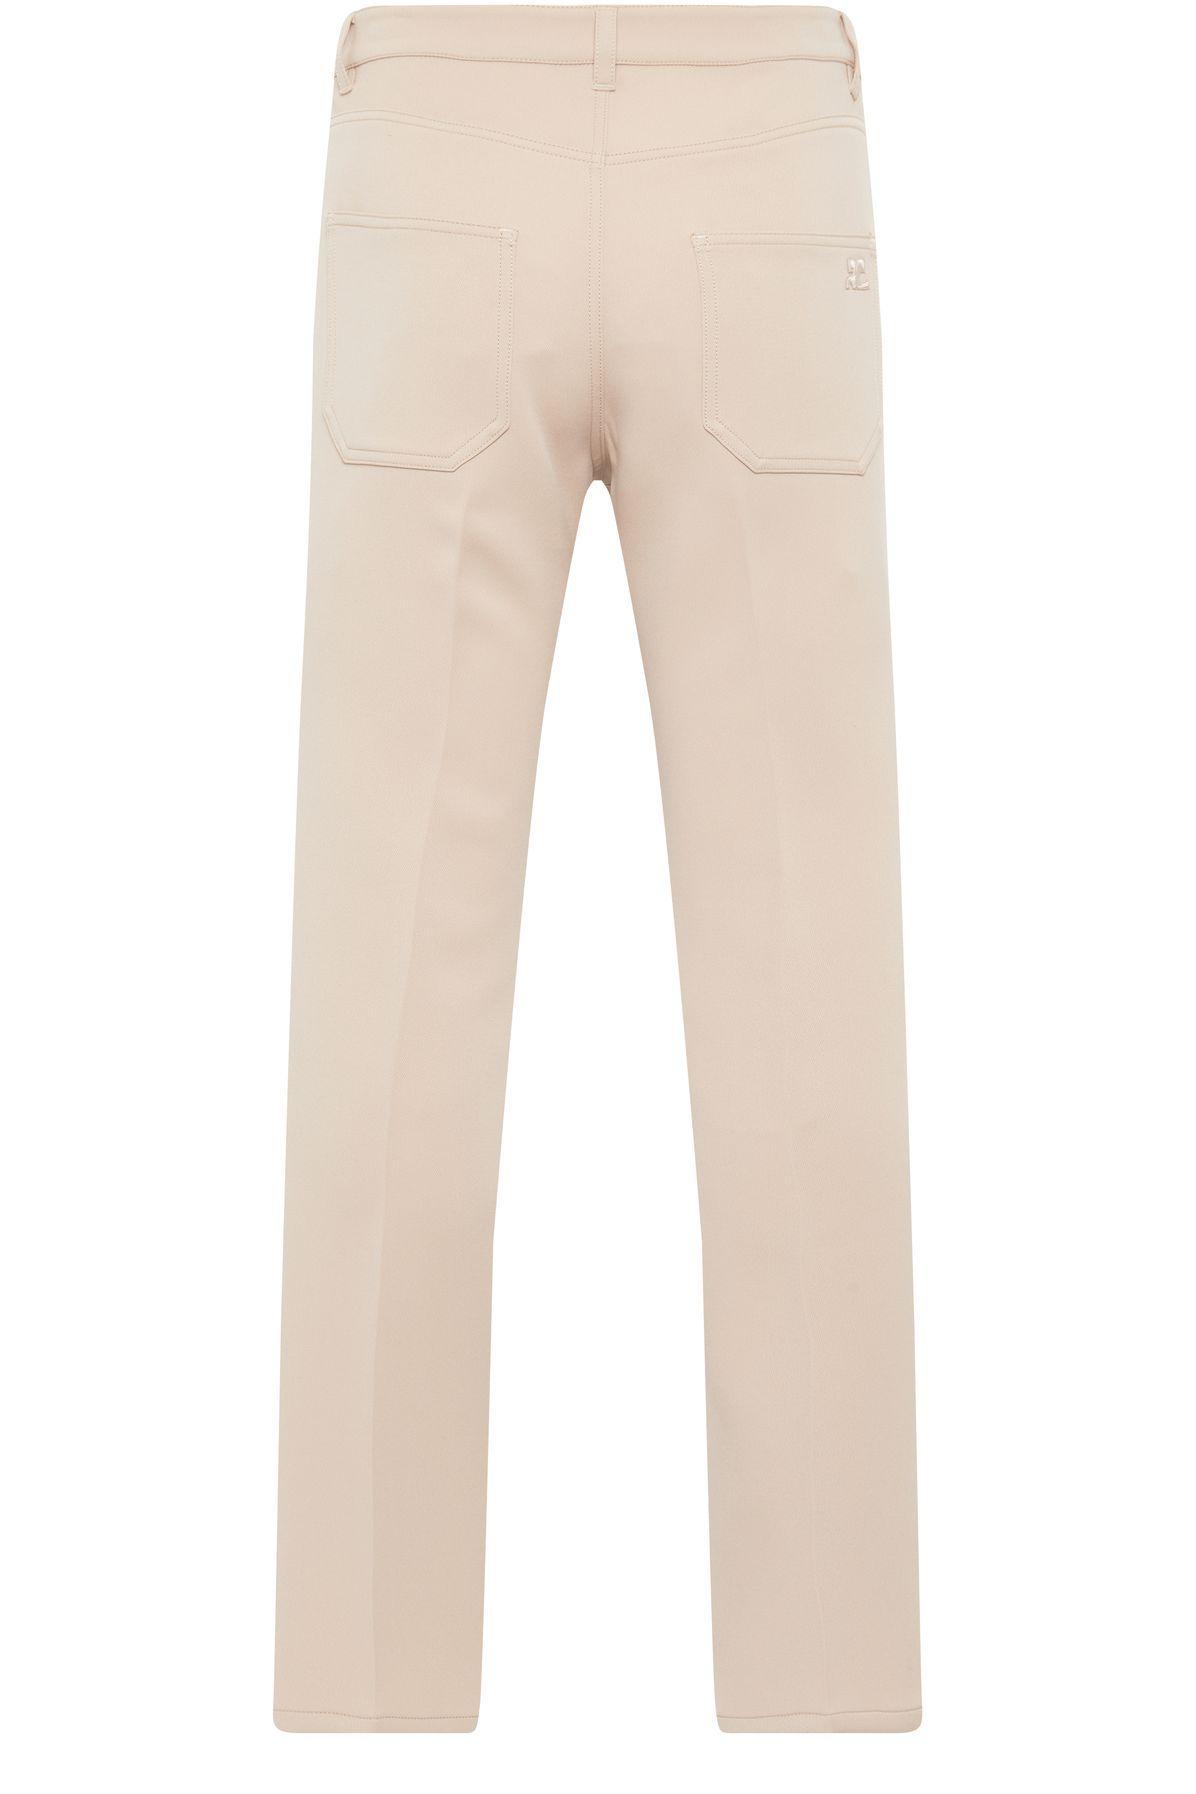 Courreges Twill 70's Bootcut Pants in Natural for Men